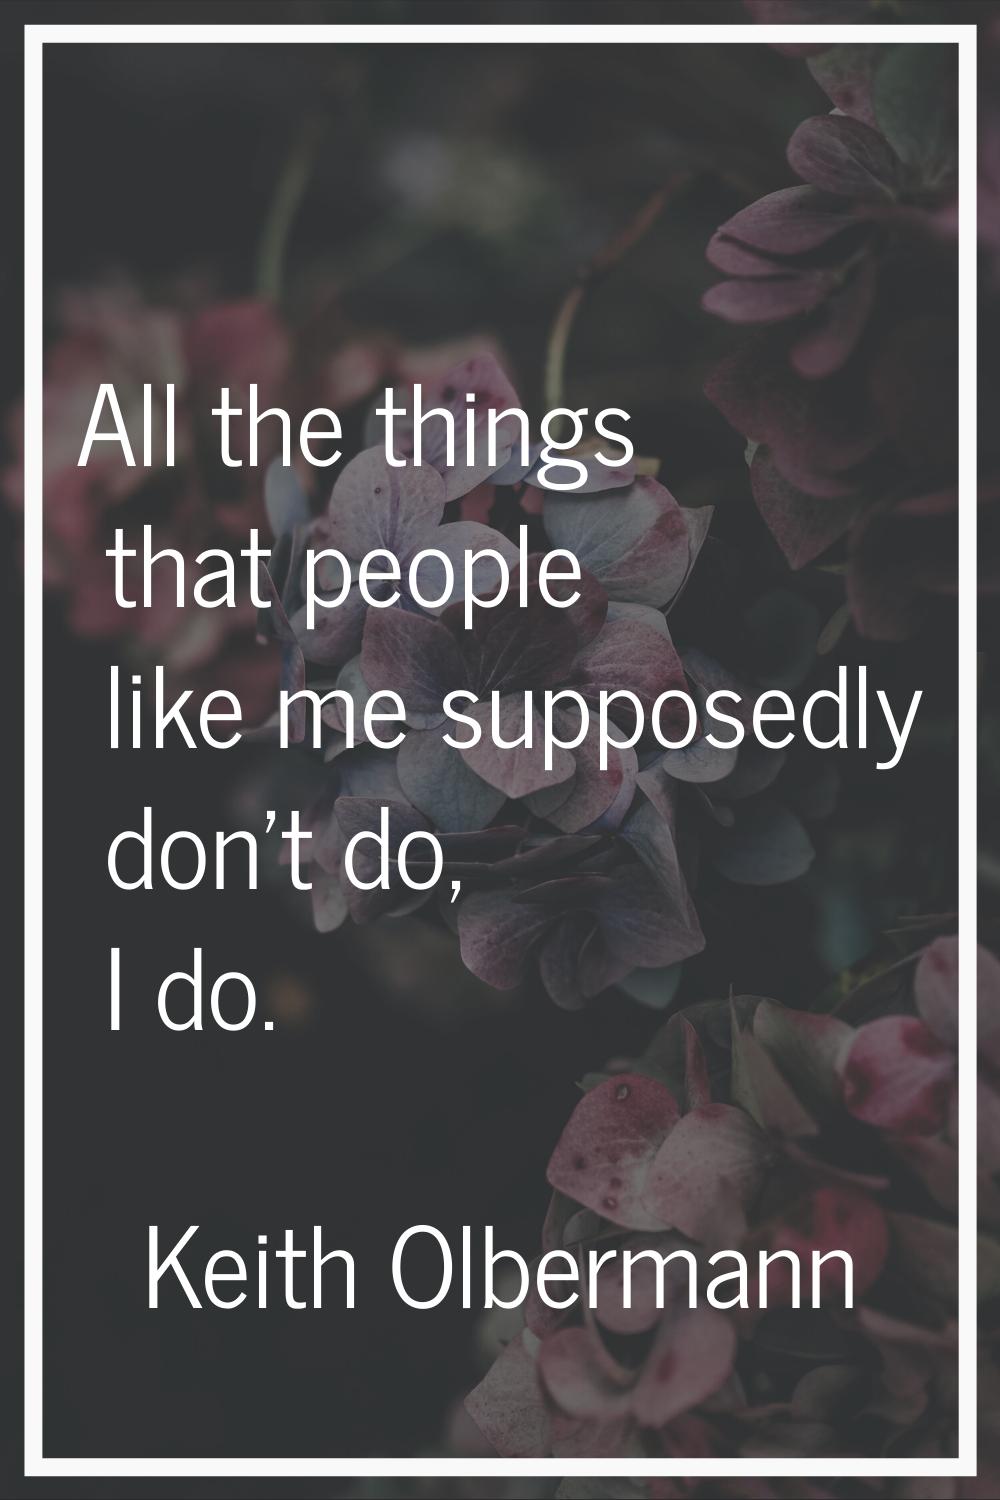 All the things that people like me supposedly don't do, I do.